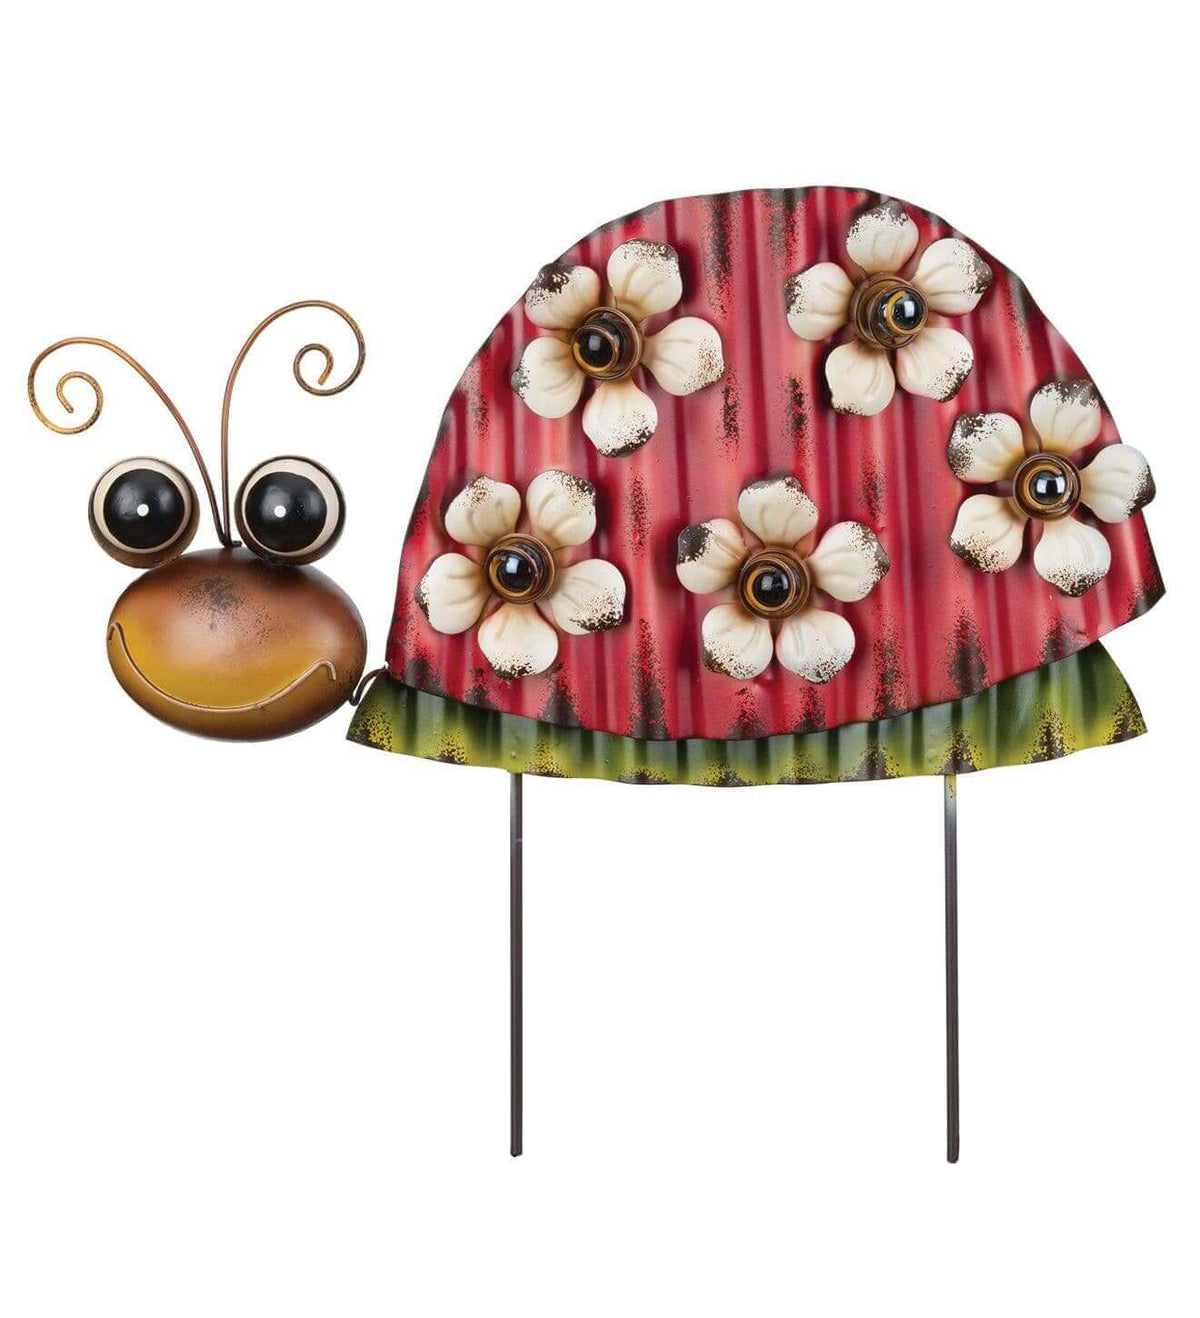 Red Ladybug with Flowers Garden Stake